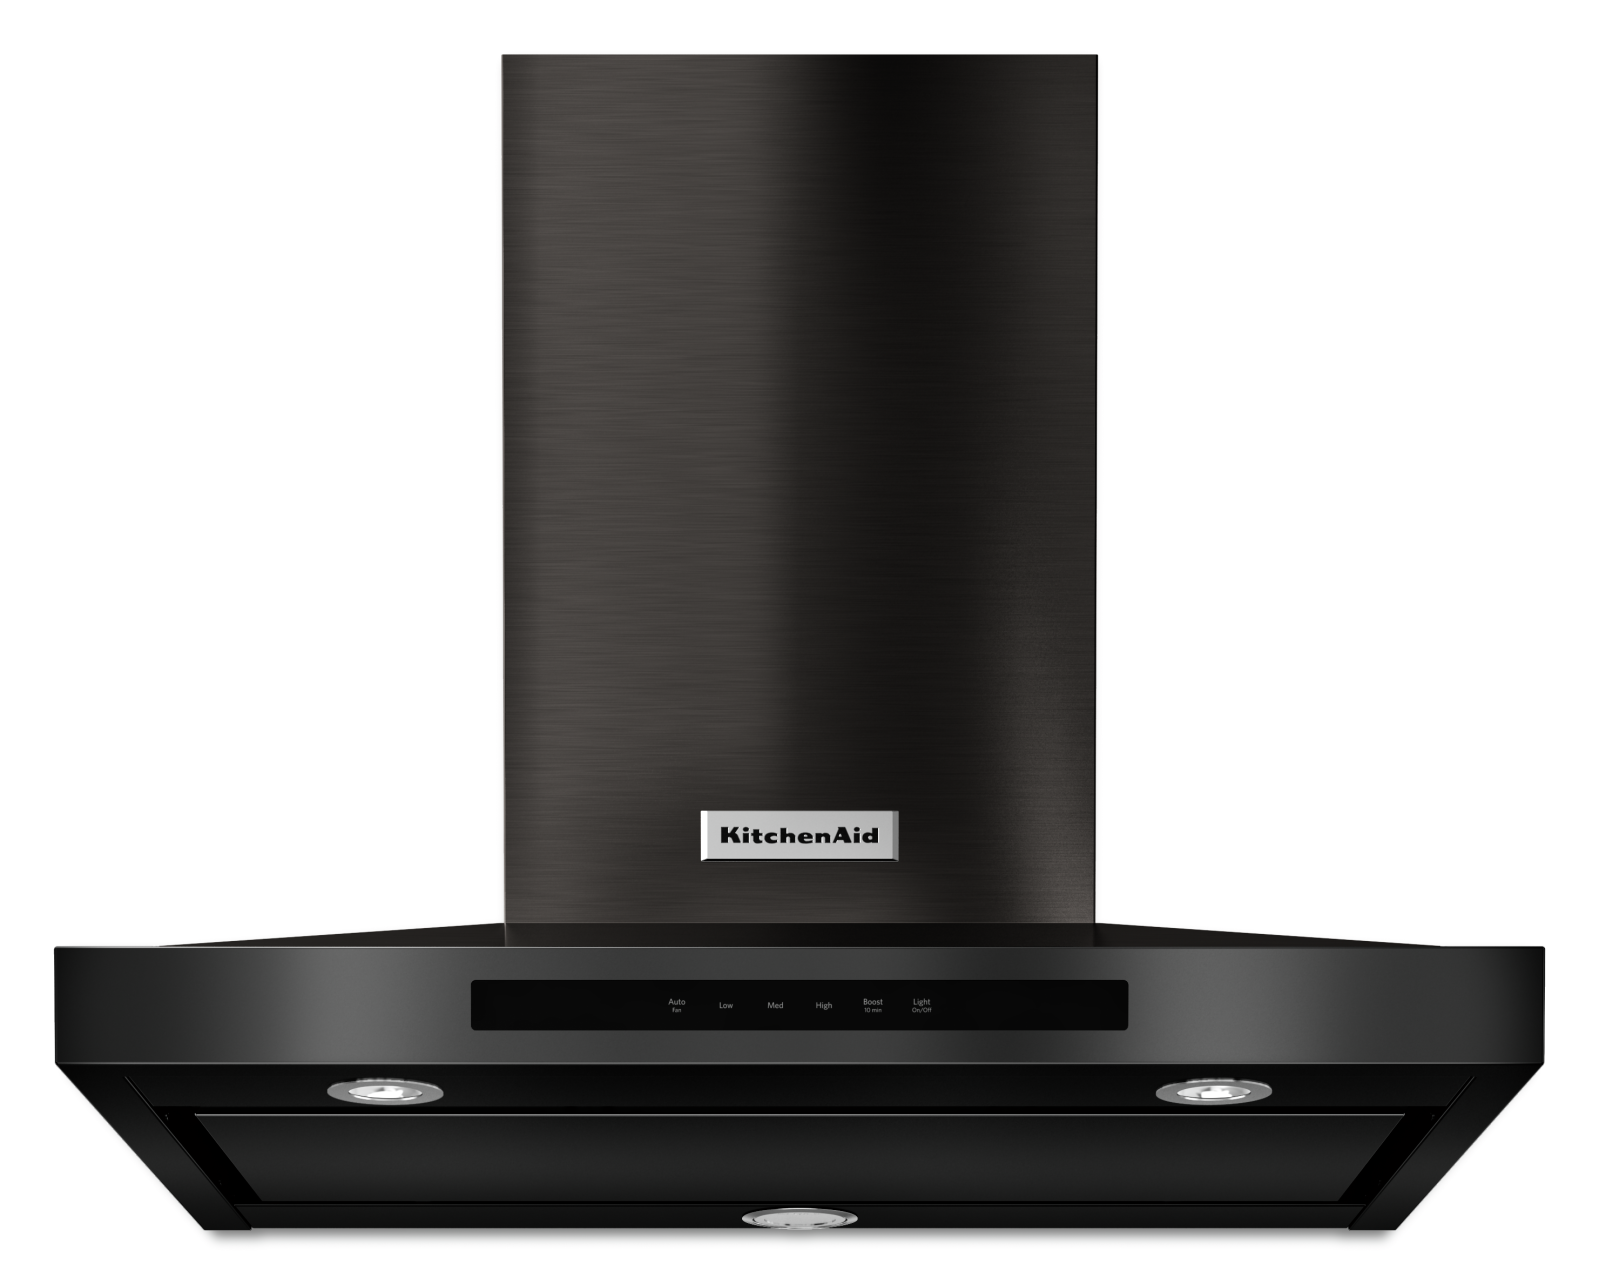 KitchenAid - 30 Inch 600 CFM Wall Mount and Chimney Range Vent in Black Stainless - KVWB600DBS